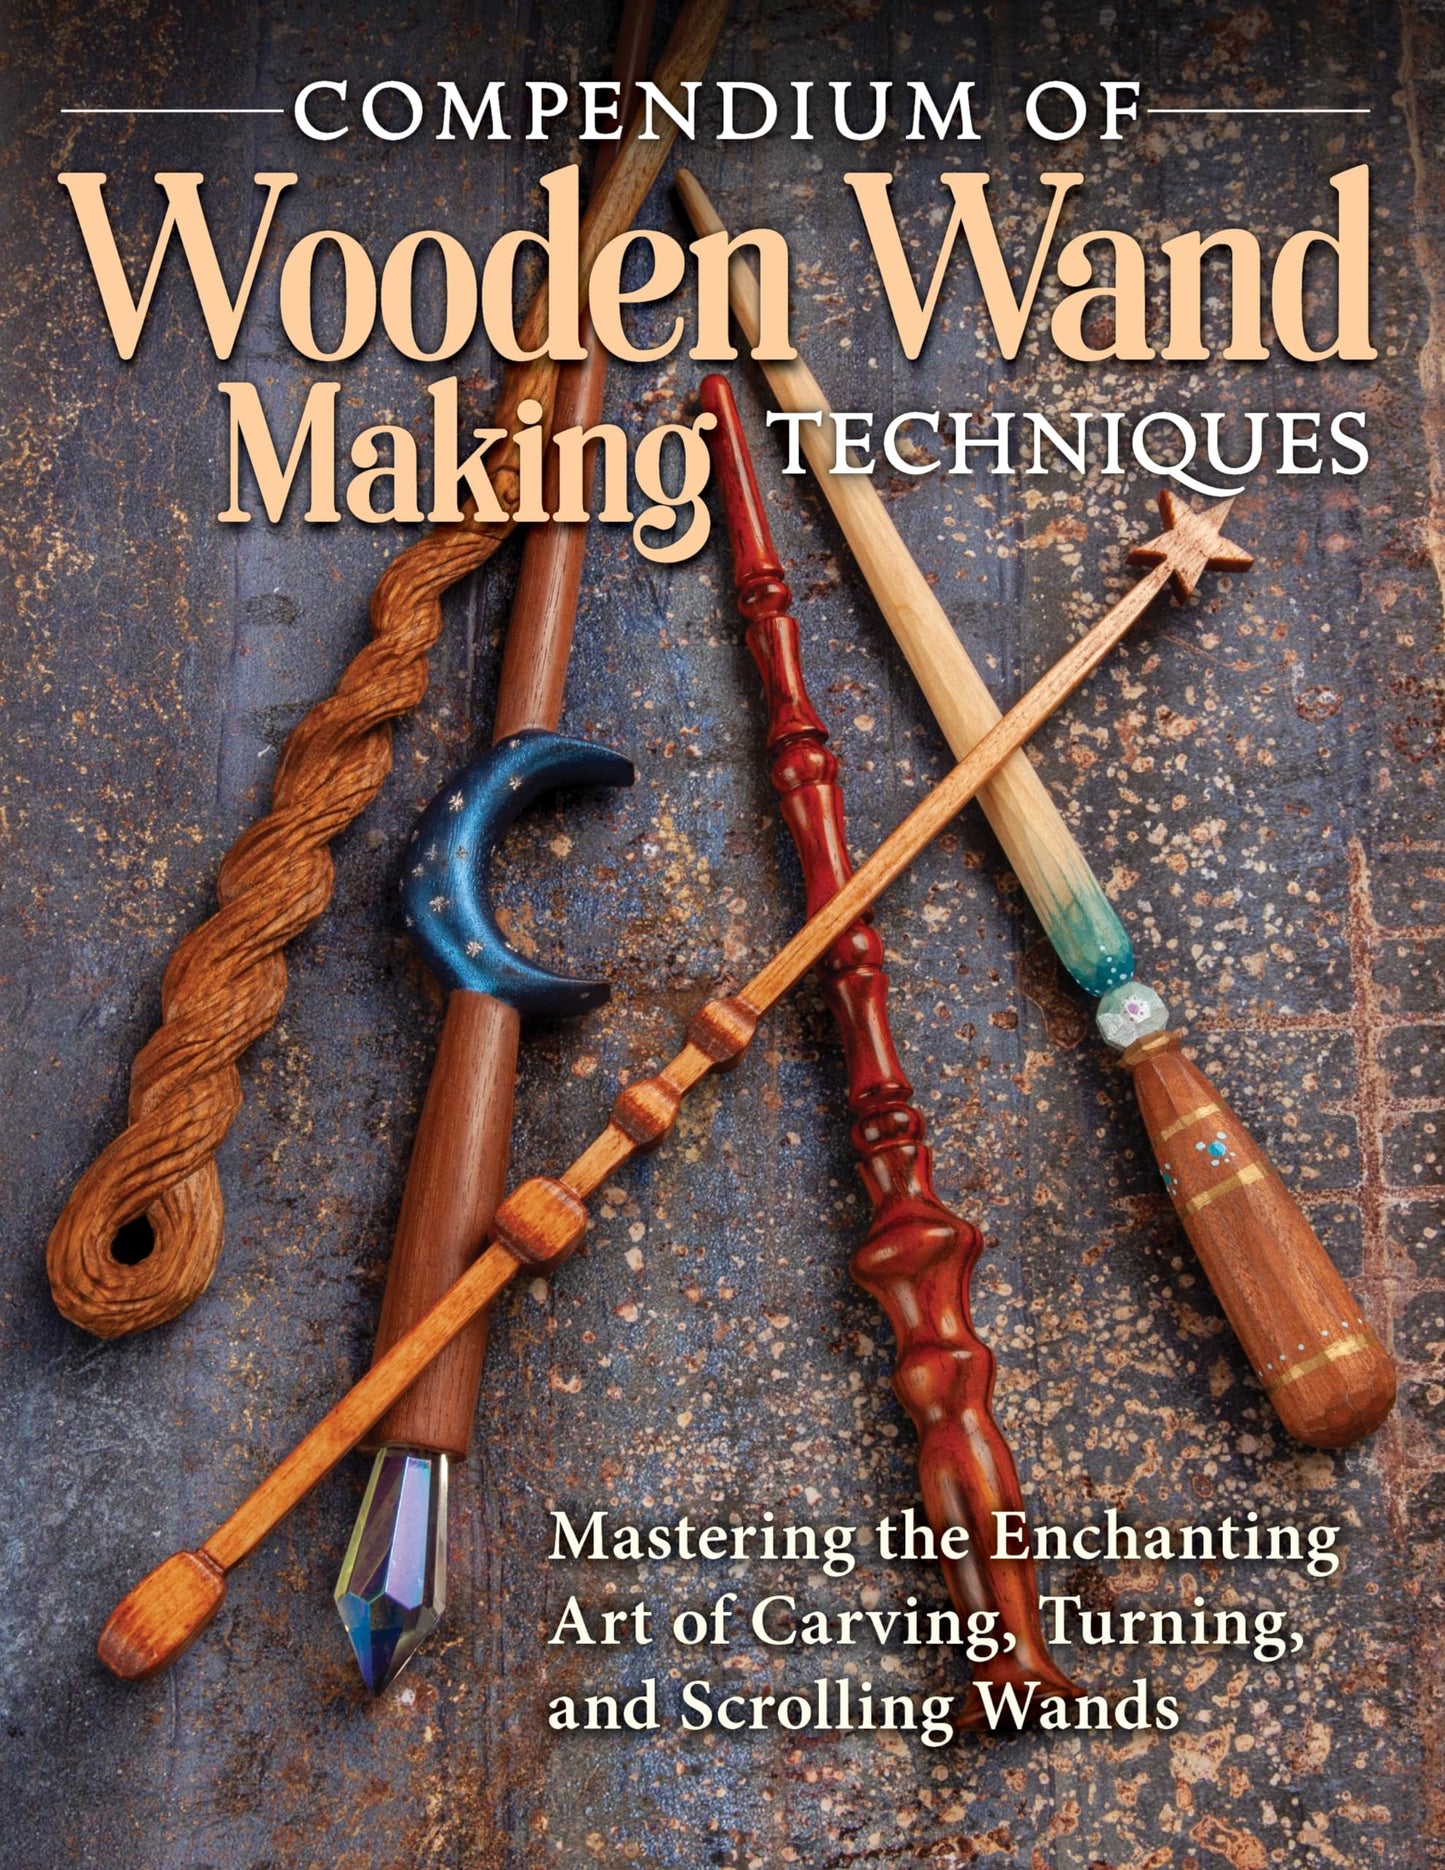 Compendium of Wooden Wand Making Techniques: Mastering the Enchanting Art of Carving, Turning, and Scrolling Wands (Fox Chapel Publishing) 20 Fantasy